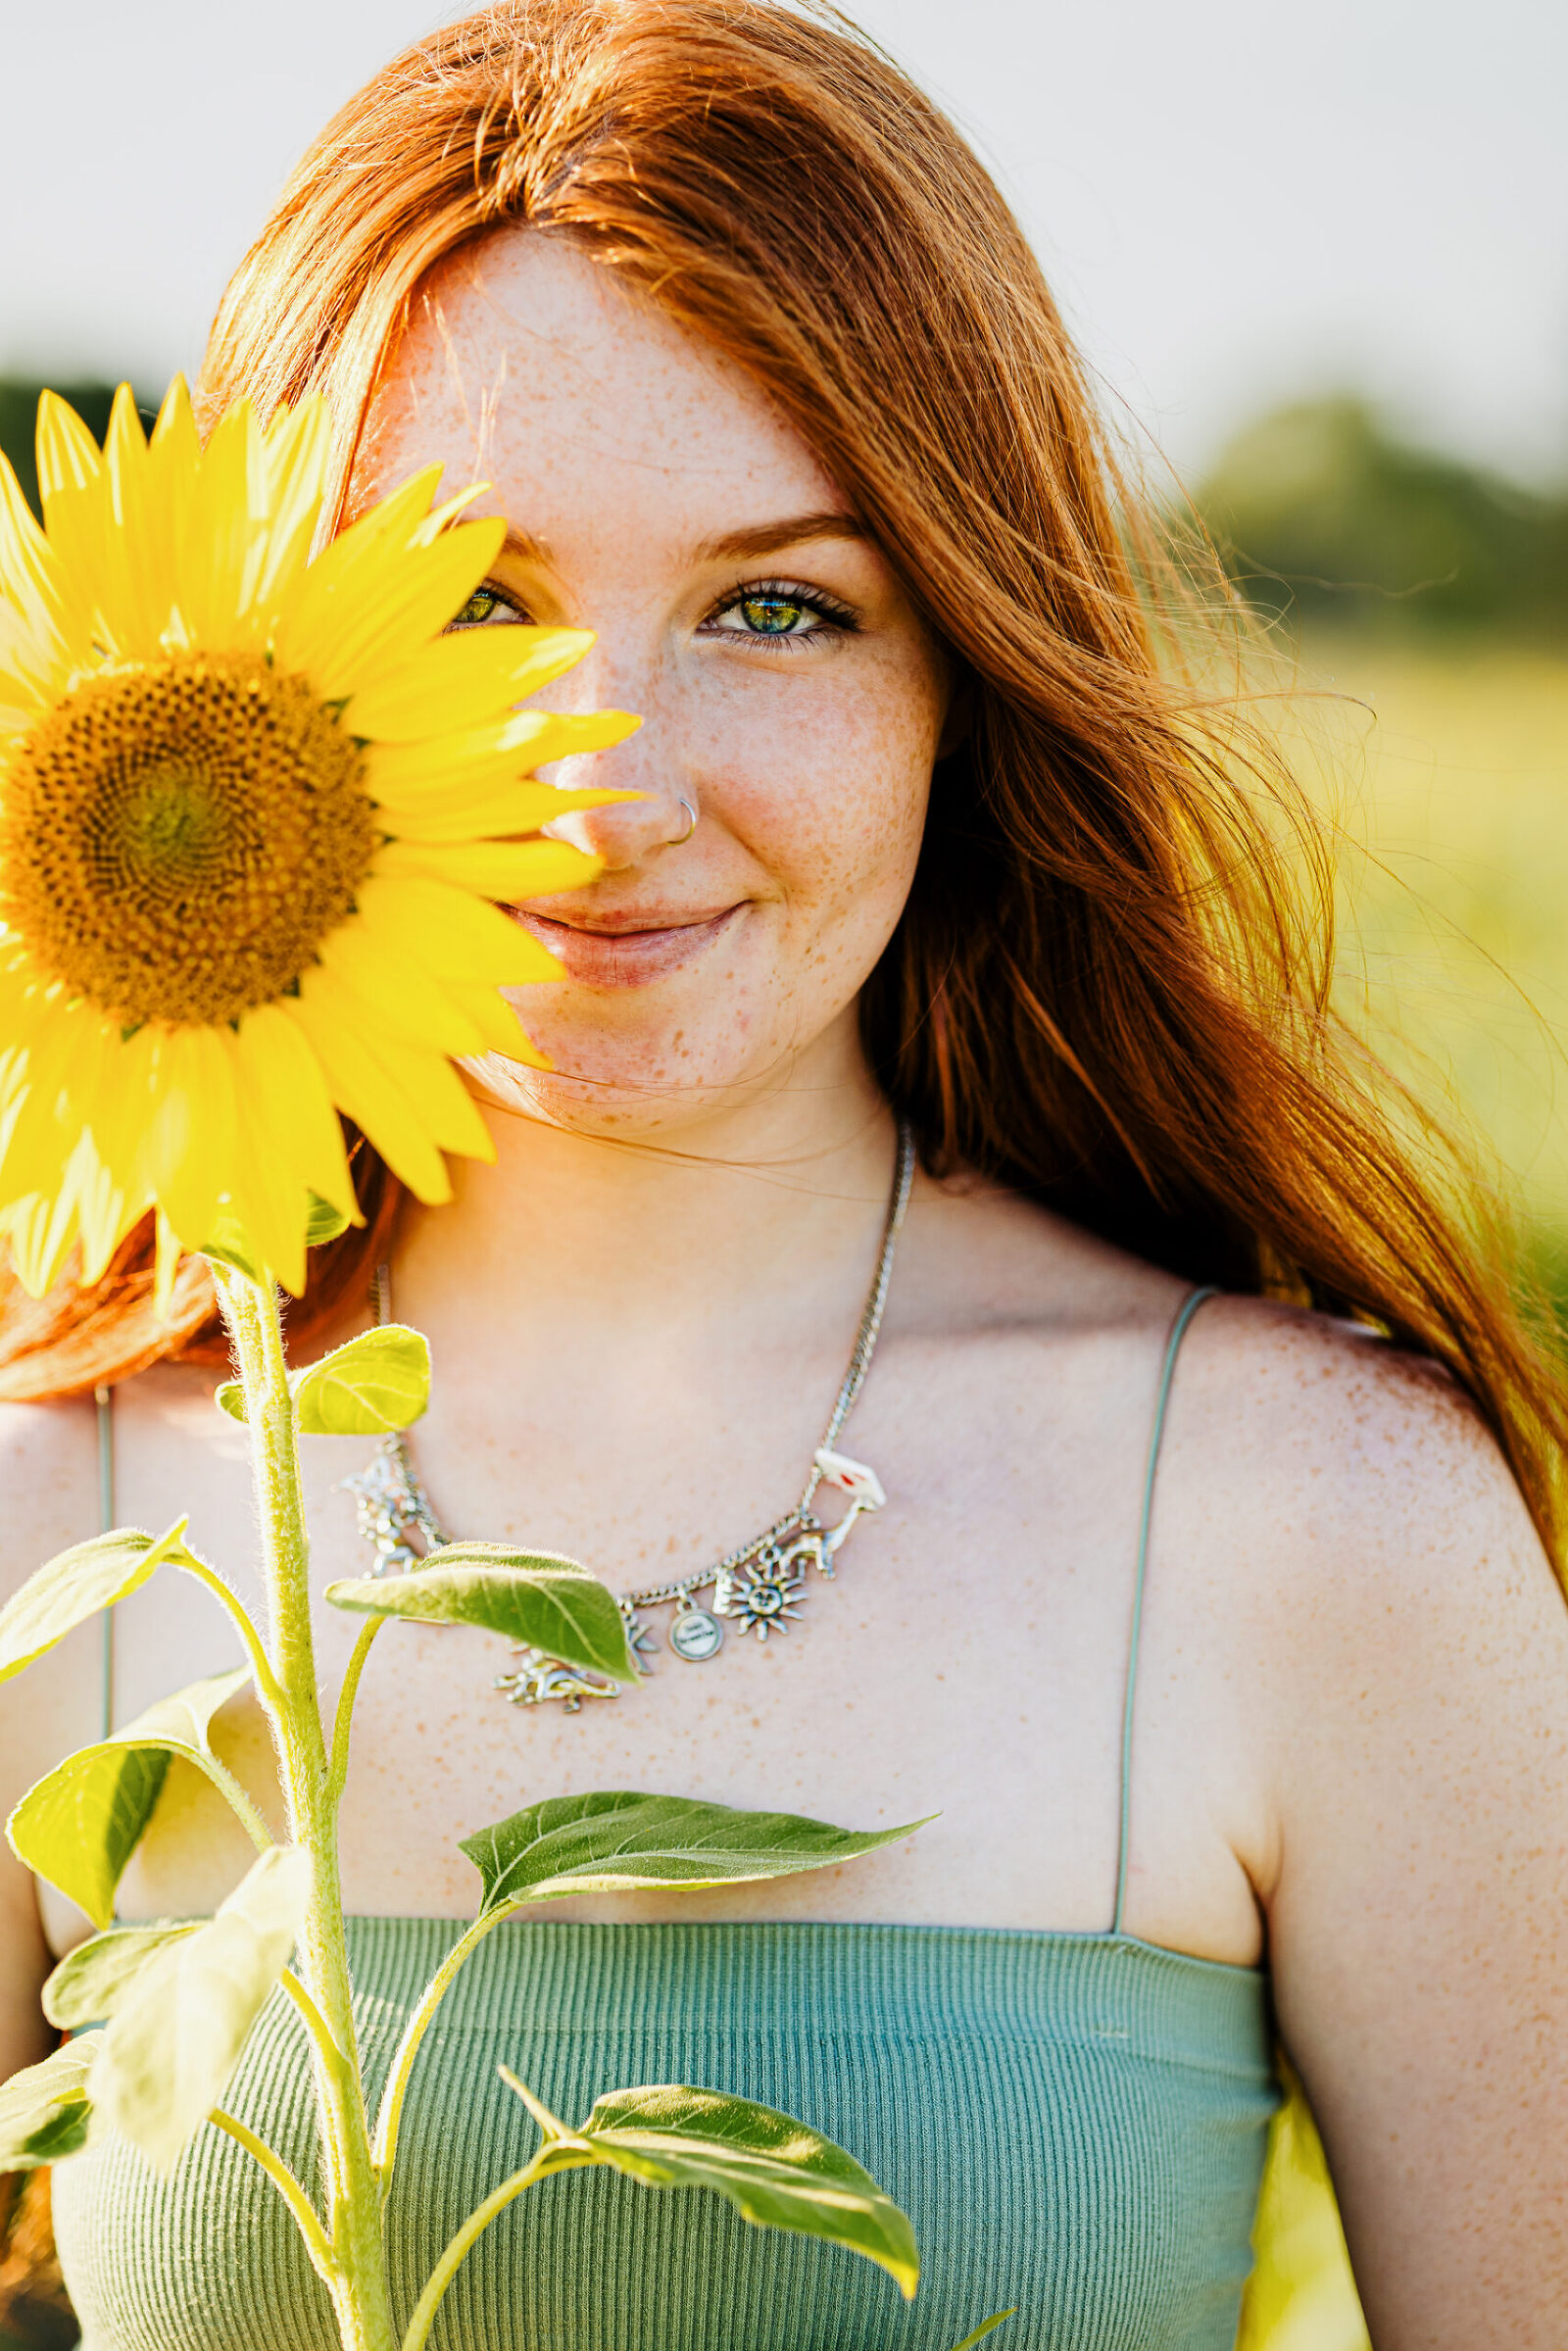 Teen girl with red hair and sage green top holding a giant sunflower.